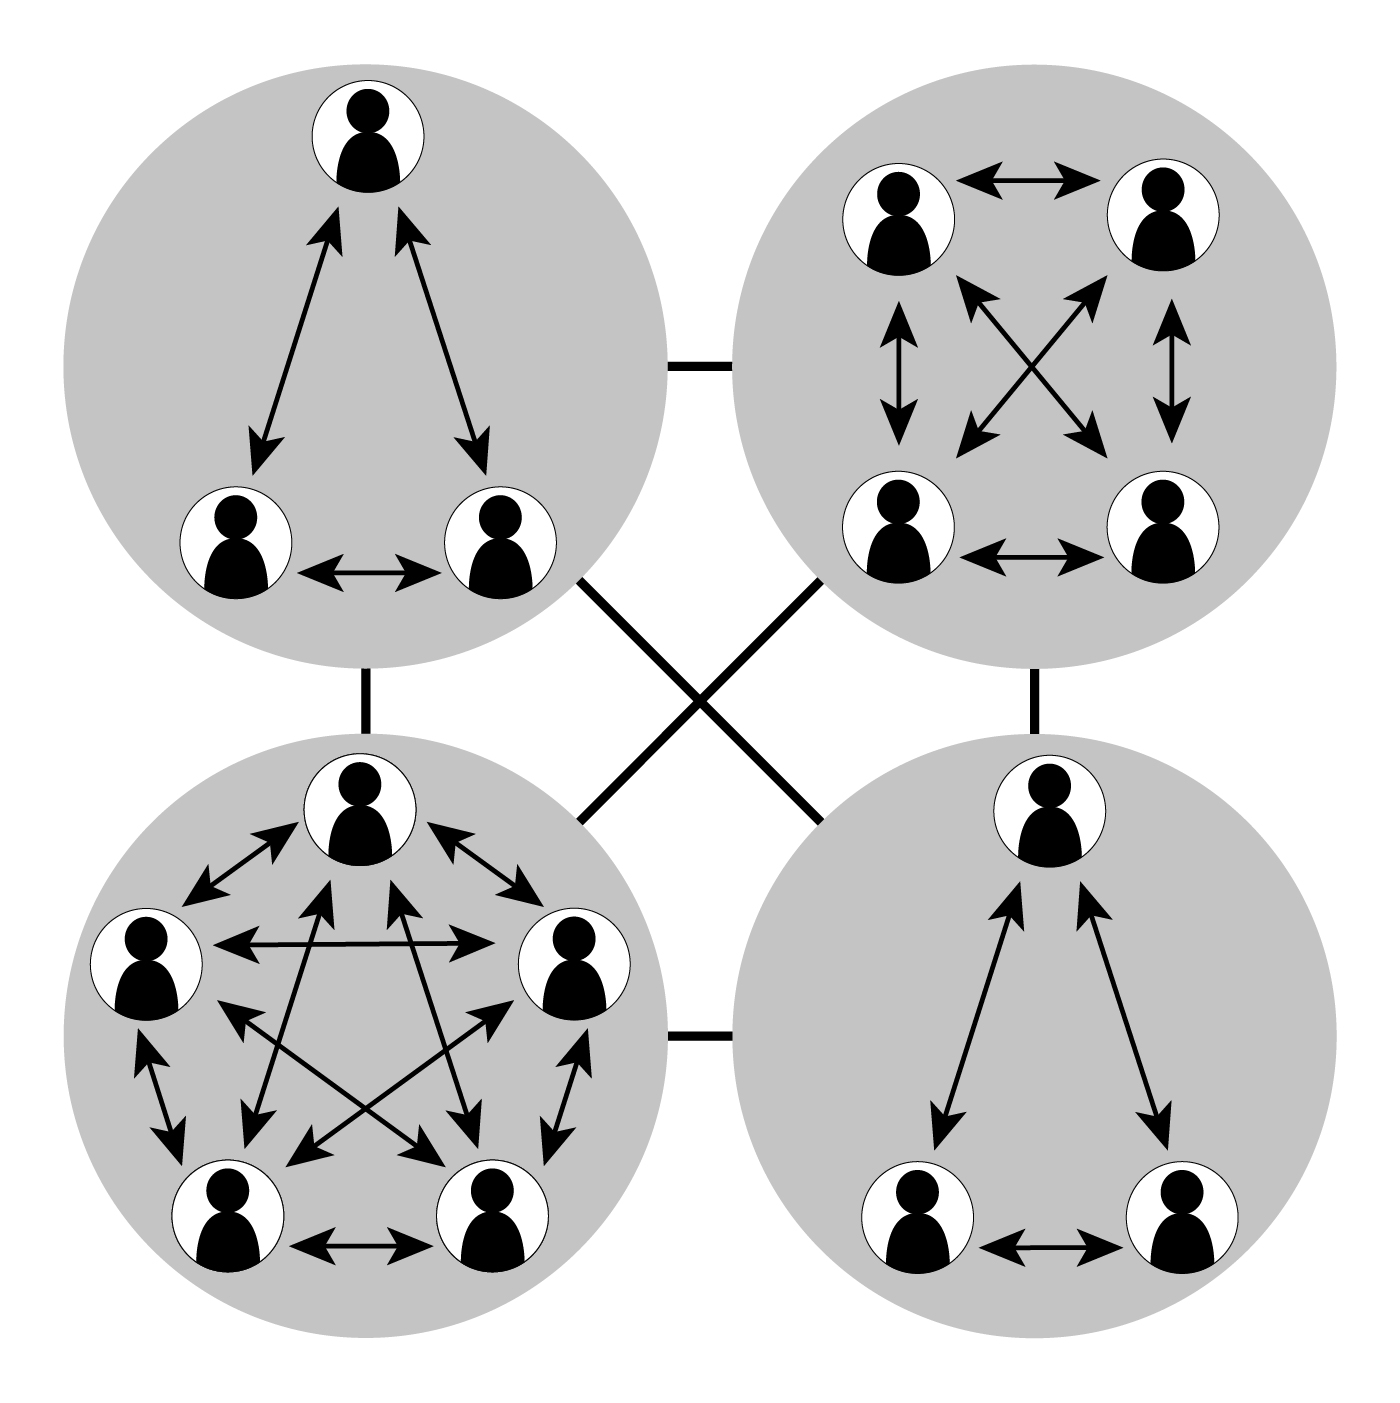 An organic structure. There are four segments that all communicate with one another. Each segment has 3 to 5 individuals who all communicate with one another.